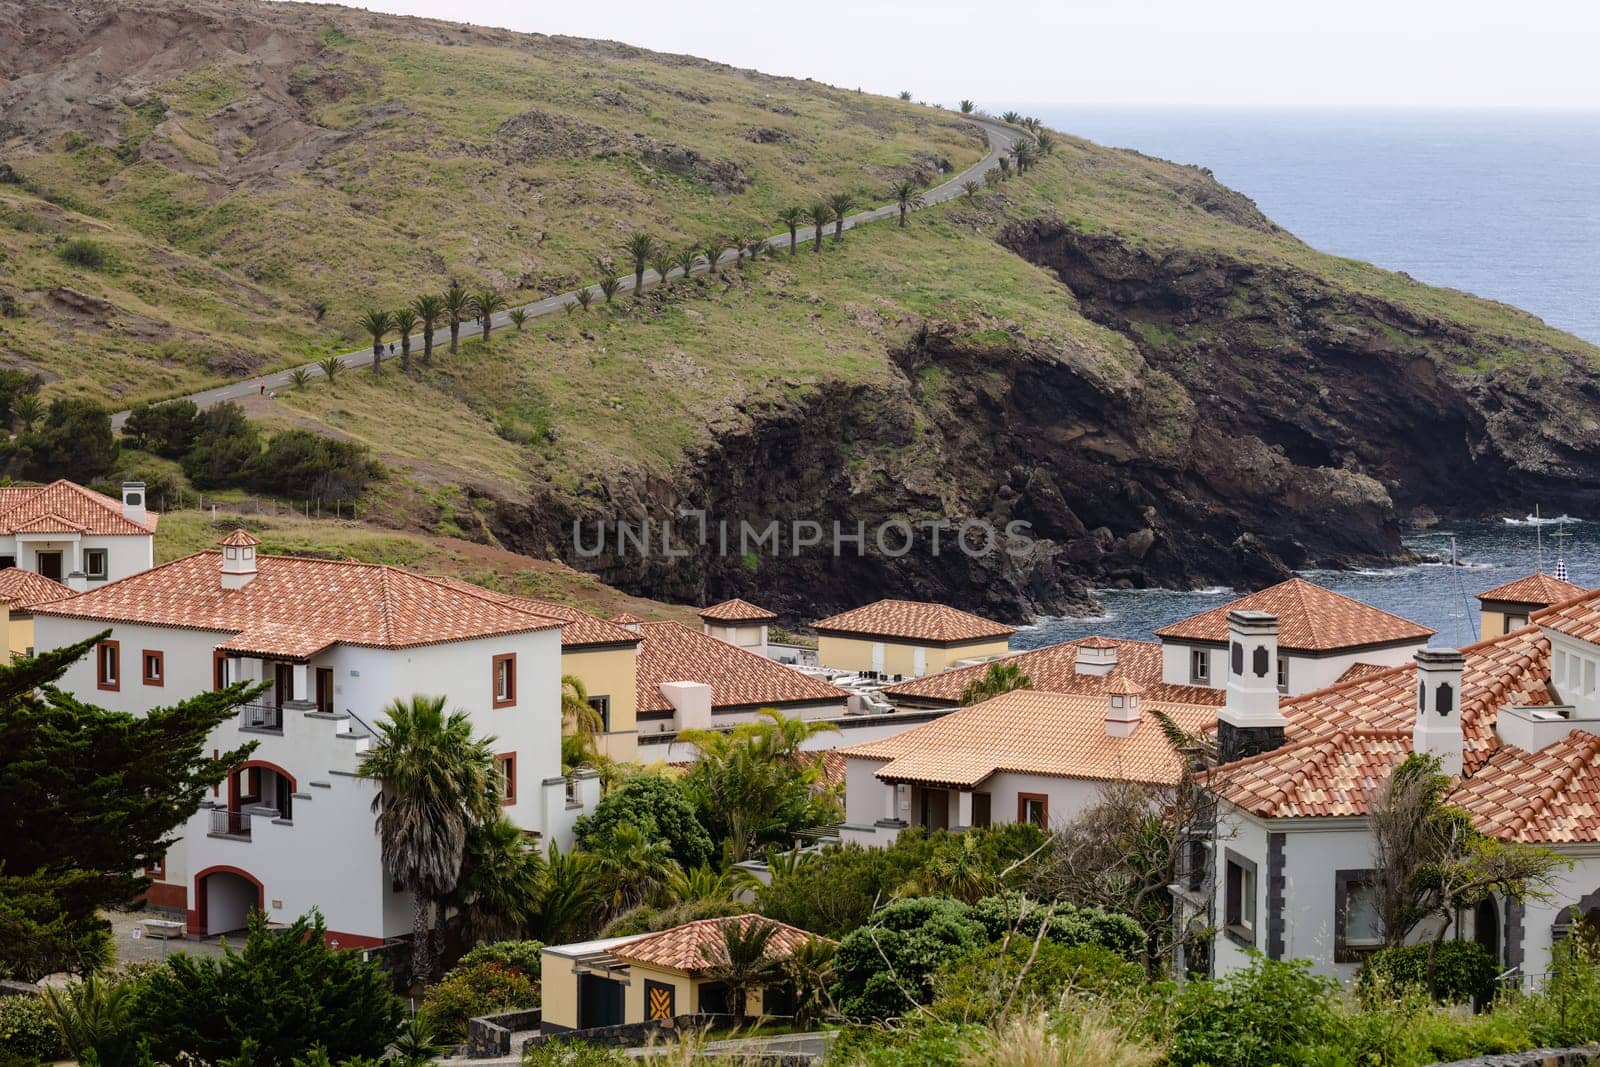 A rural village perched atop a hill, with picturesque architecture and lush trees surrounded by winding roads. Madeira, Portugal